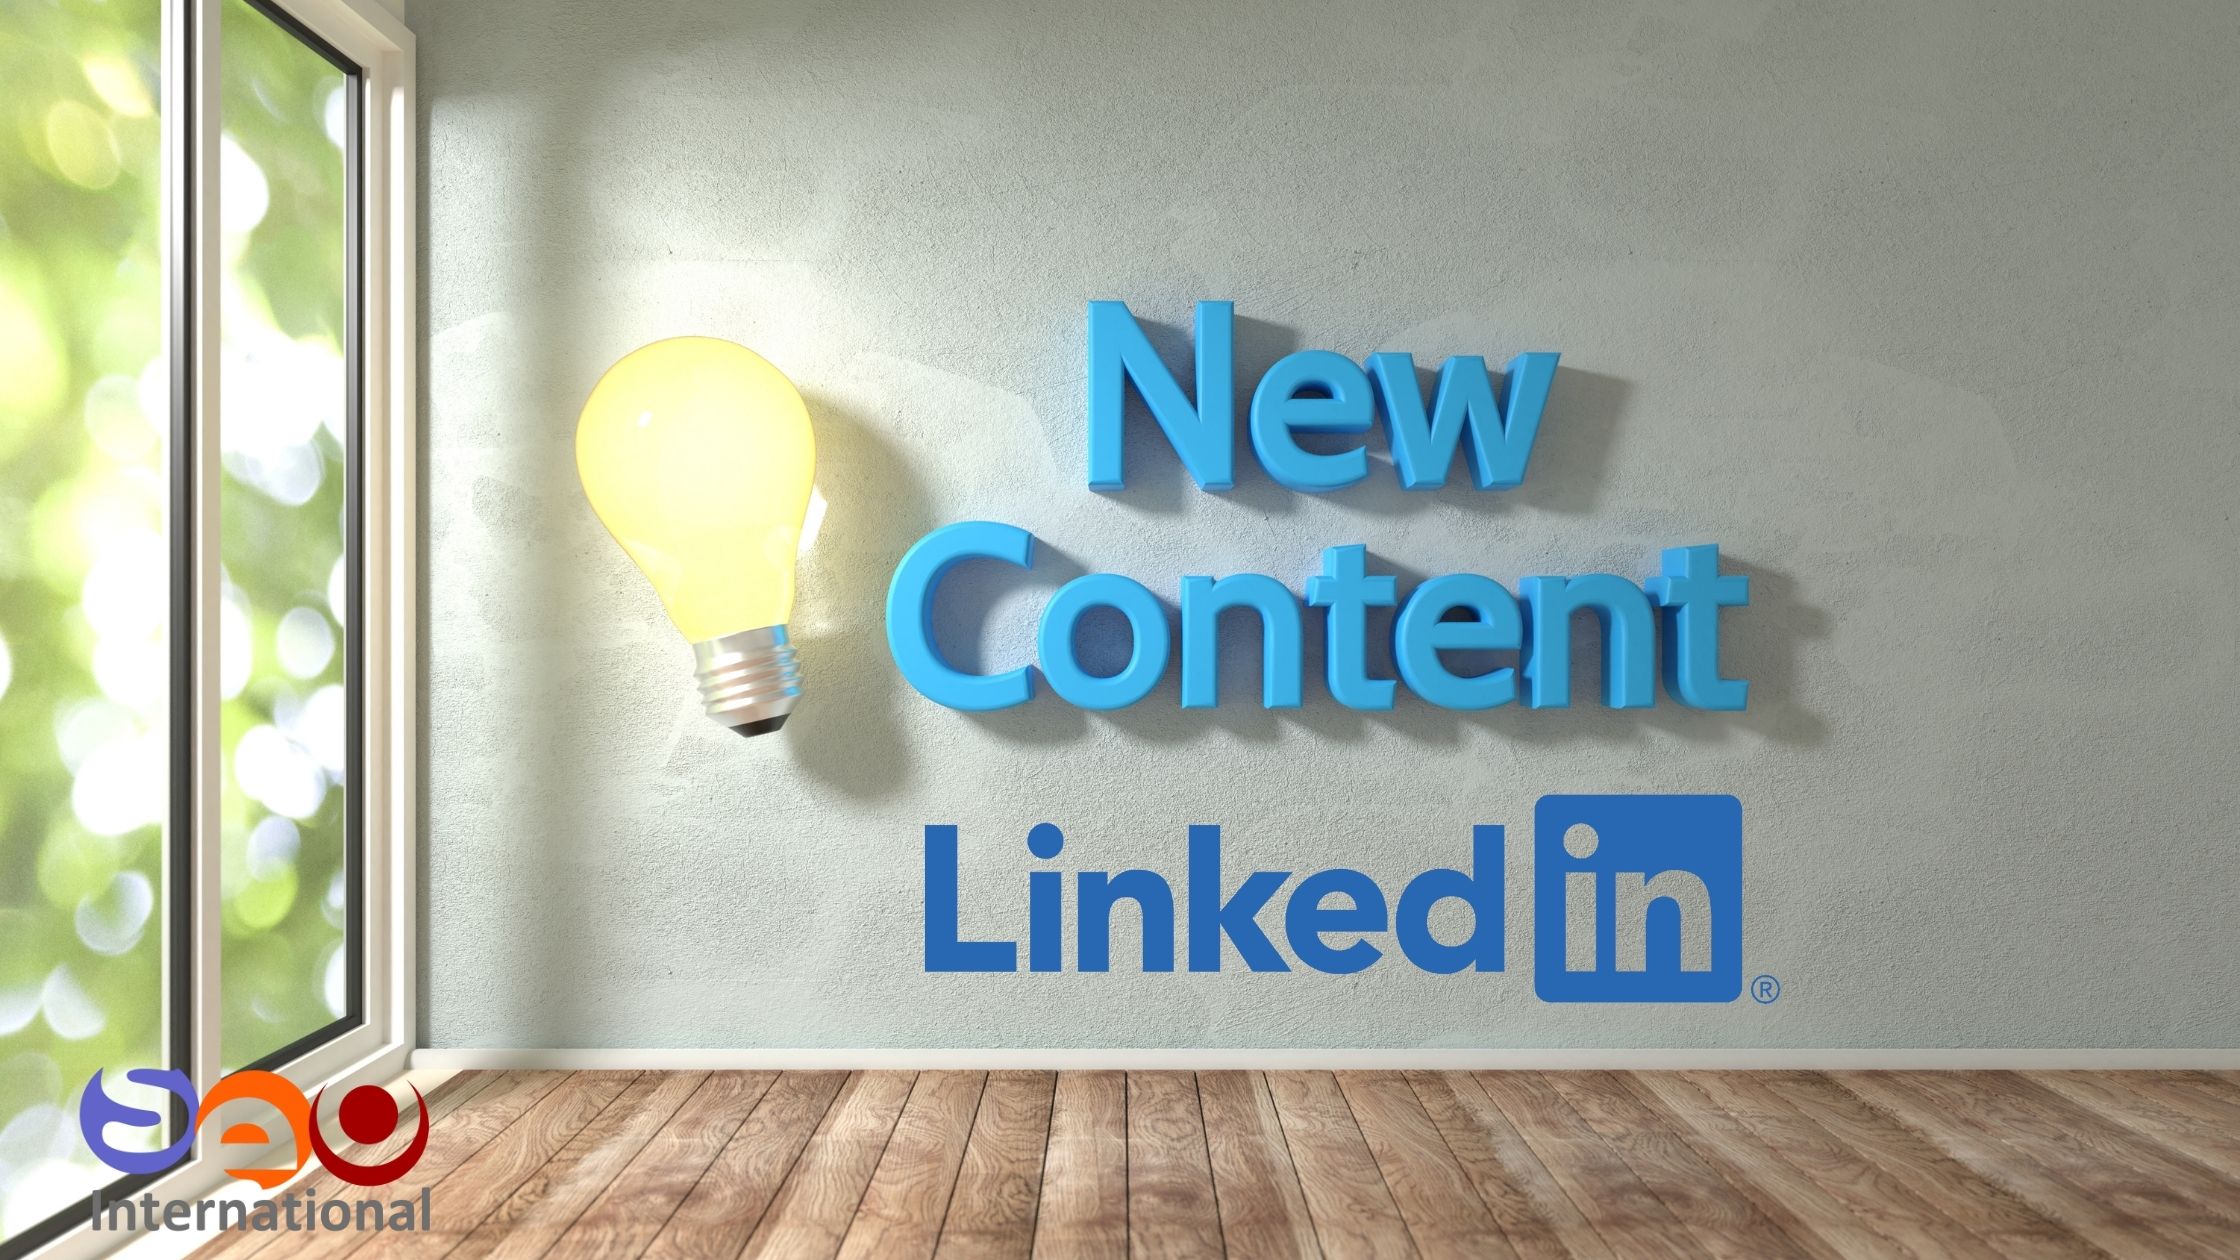 LinkedIn Content Suggestion Tool